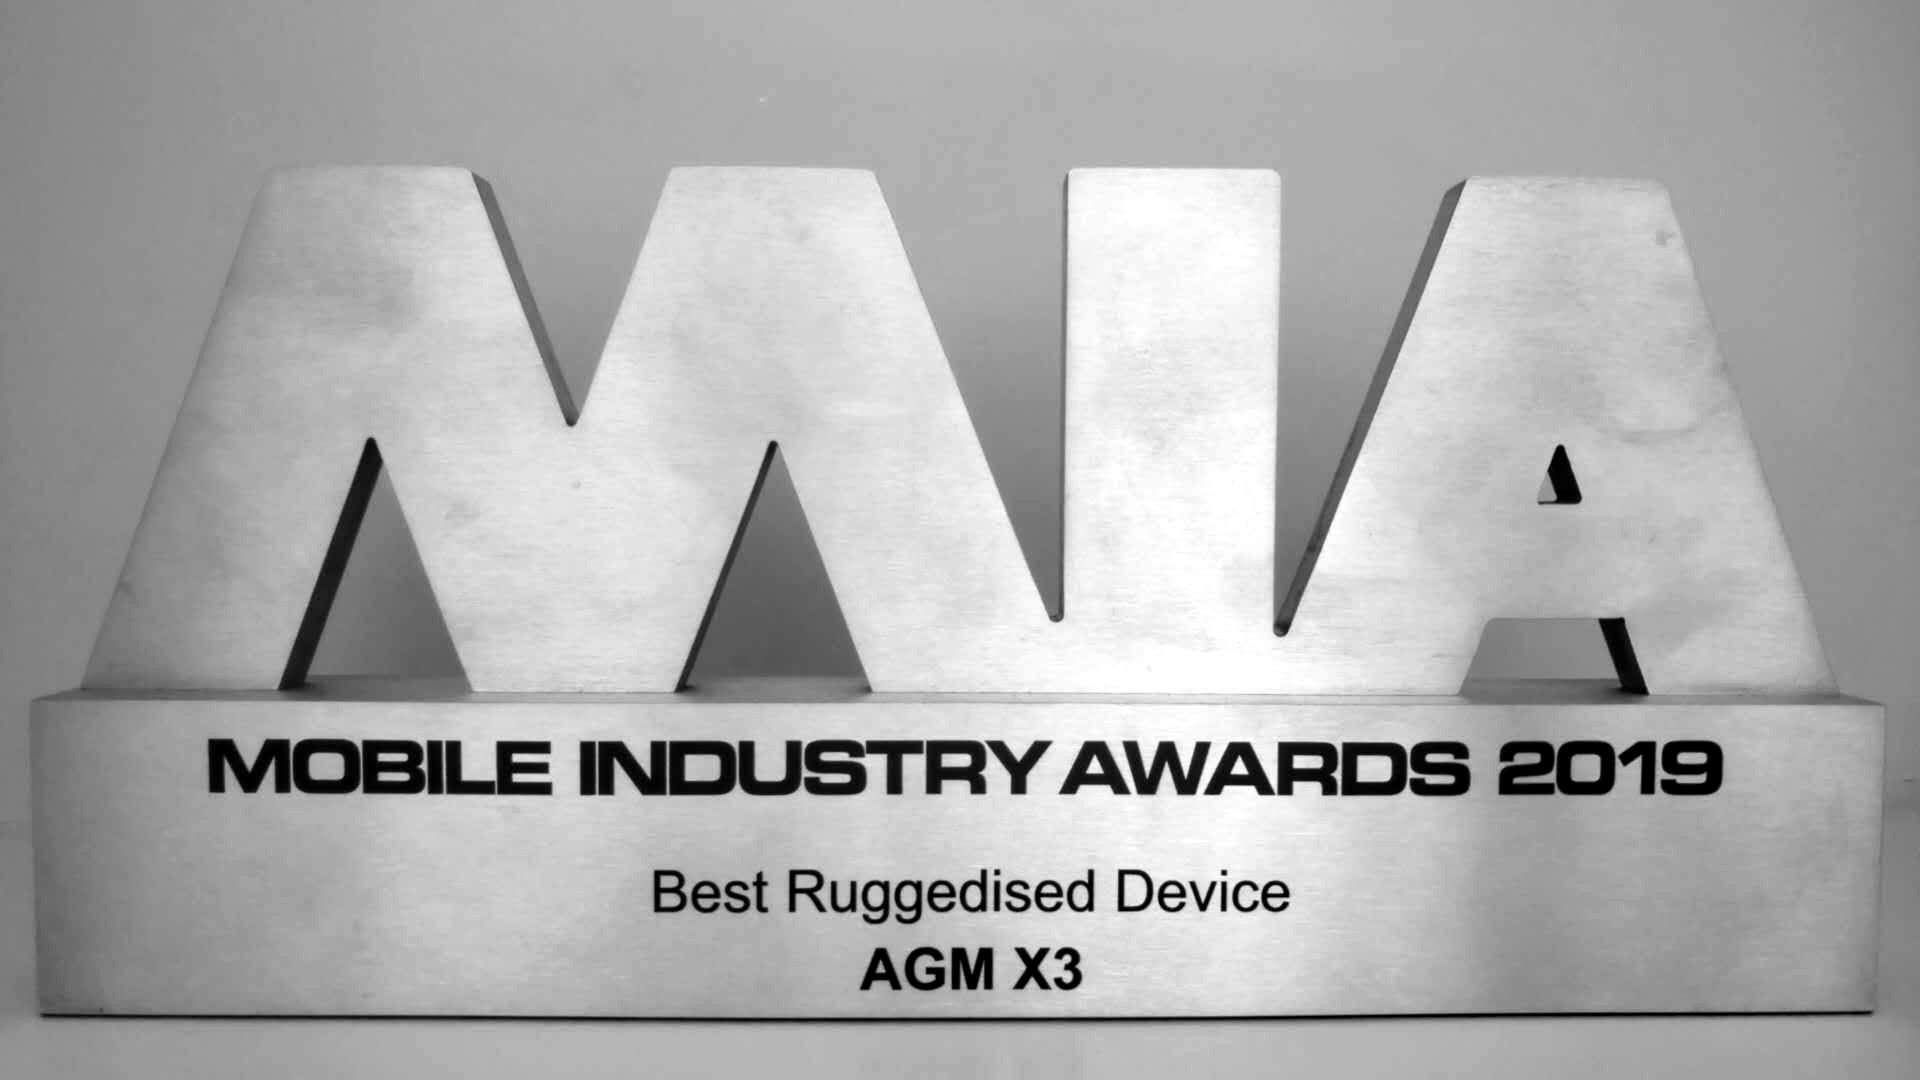 Rugged and pretty, the AGM X3 scores a Mobile Industry Awards statuette